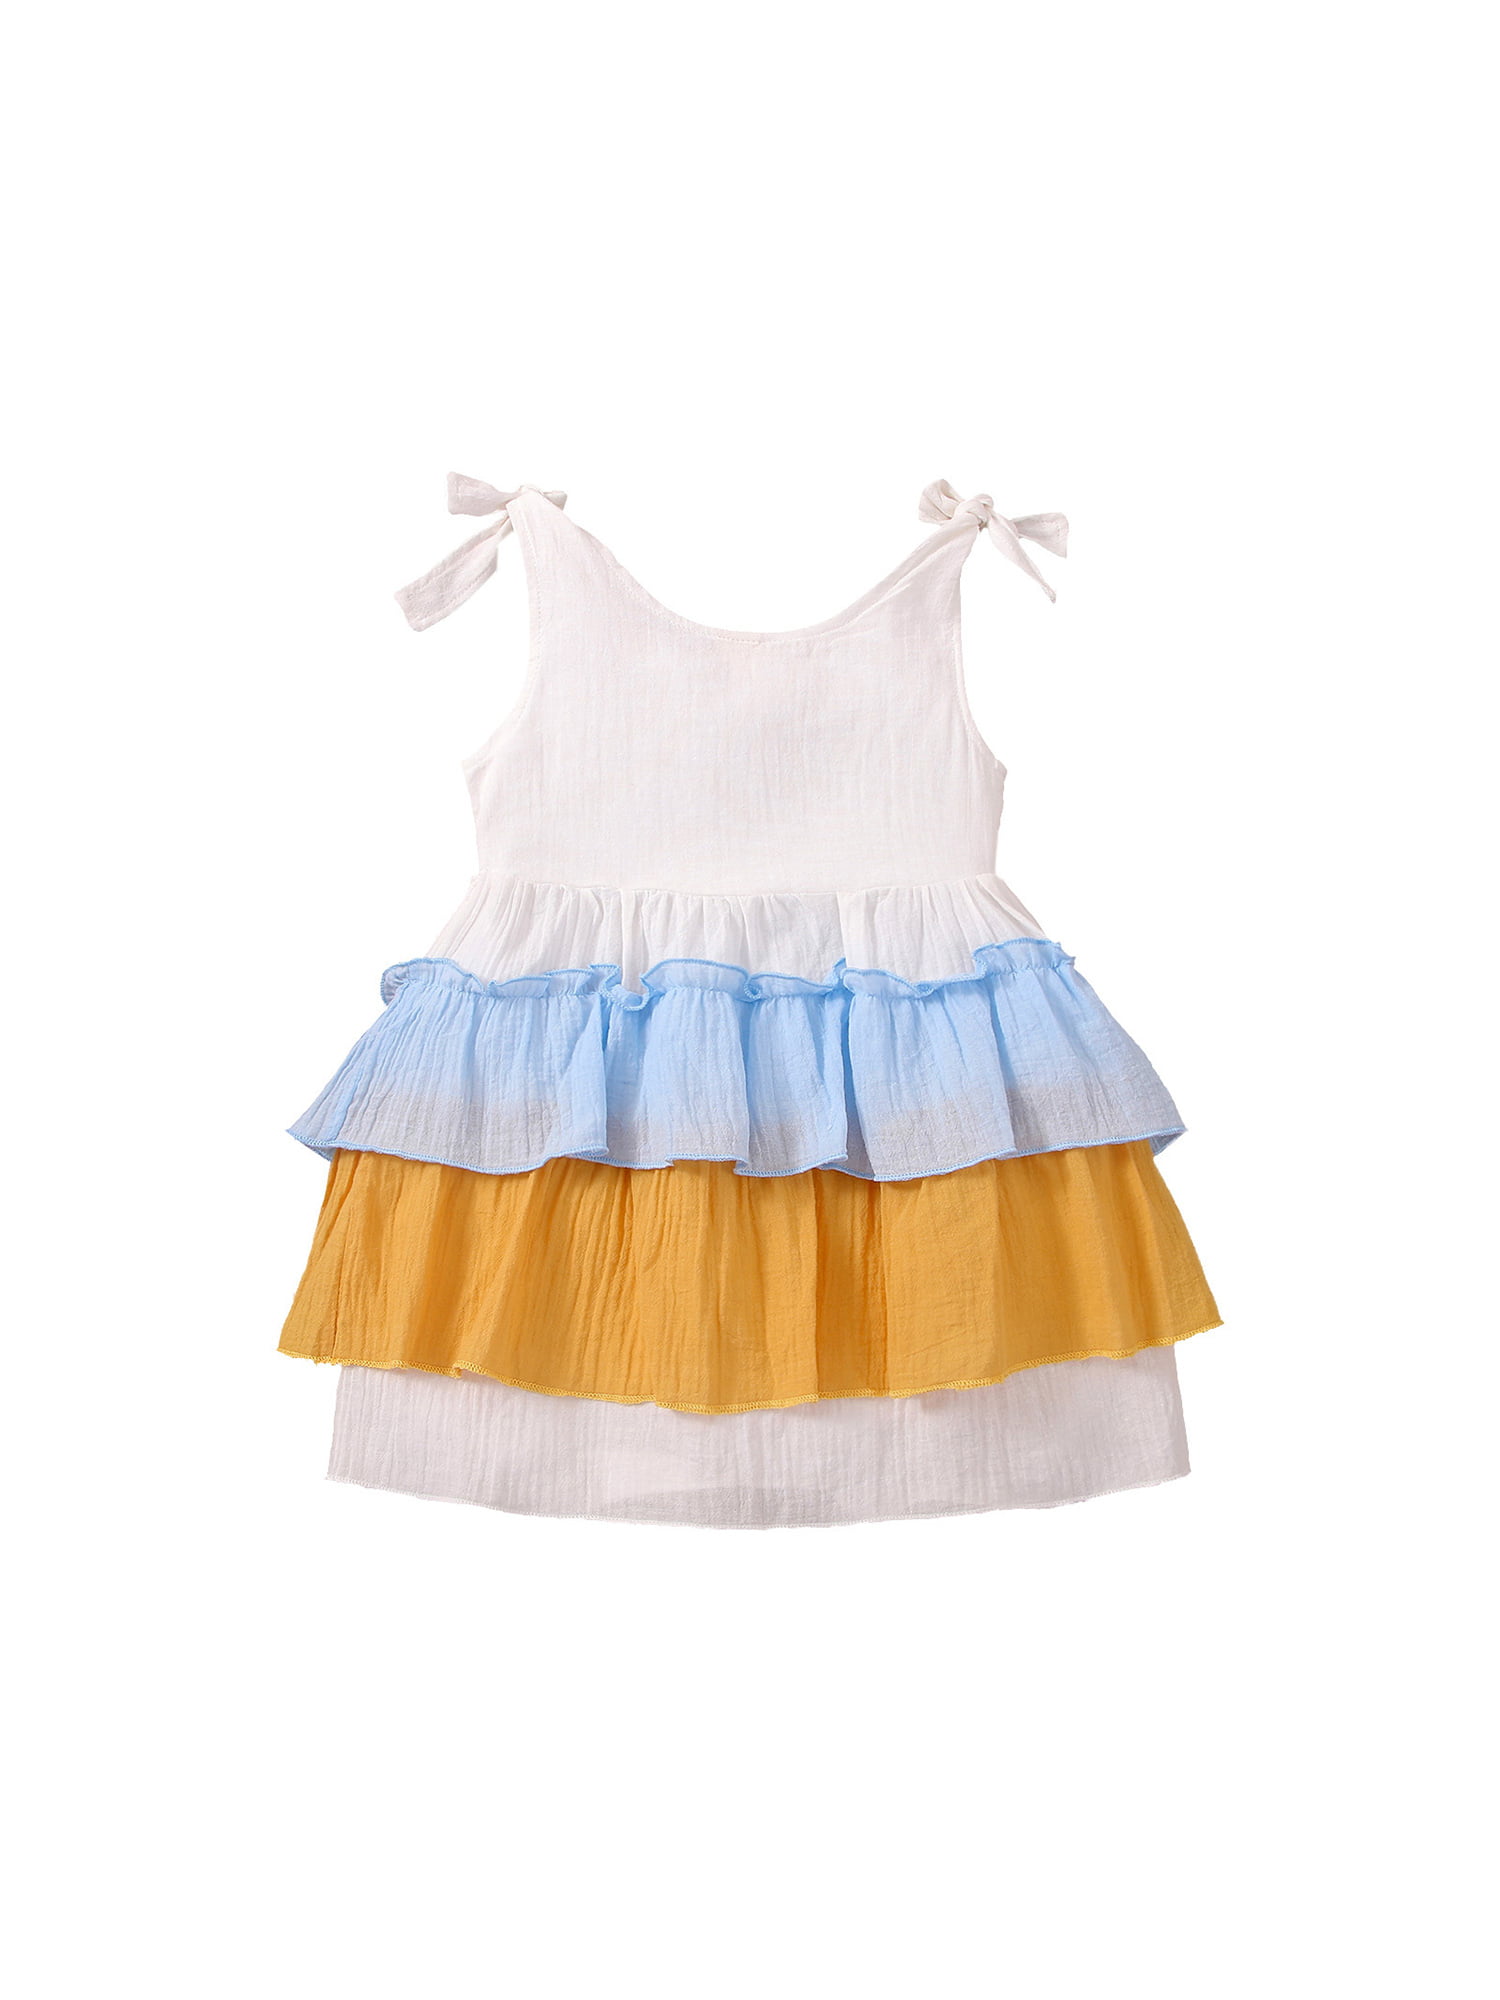 10 Toddler & Girls Marmellata $99 White w/ Embroidery Dress Size 2T 